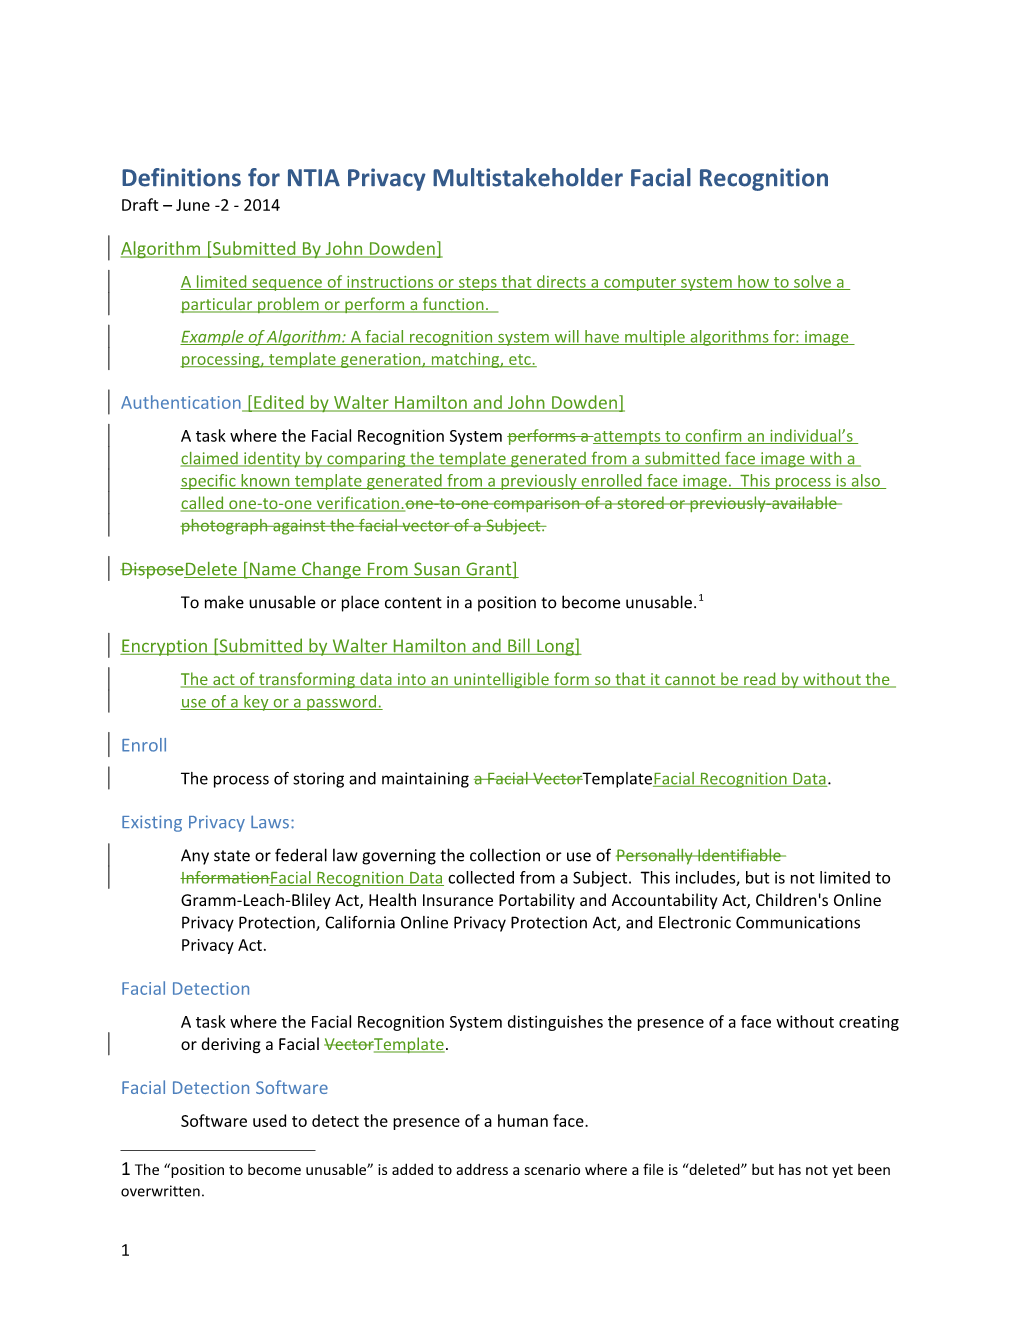 Definitions for NTIA Privacy Multistakeholder Facial Recognition